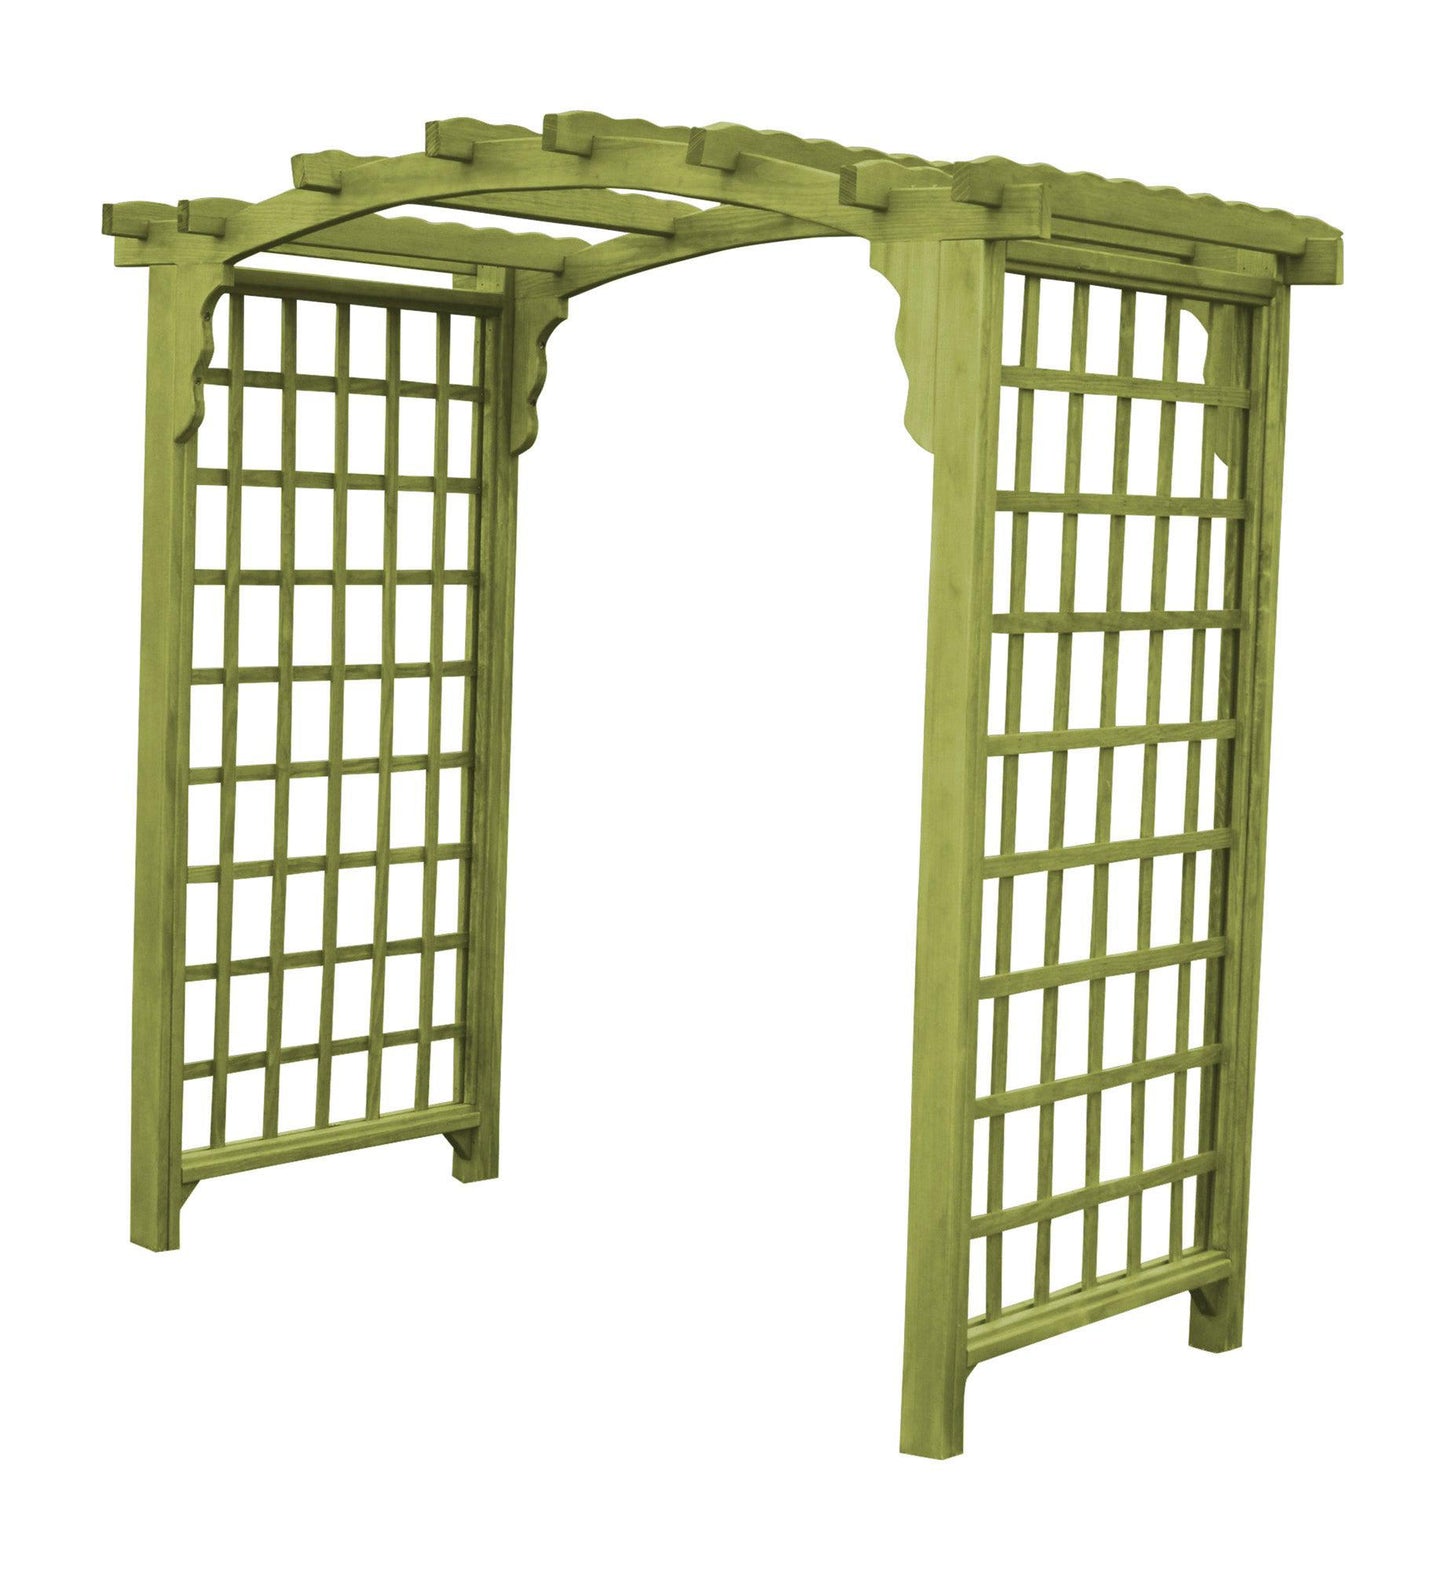 A&L FURNITURE CO. 5' Cambridge Pressure Treated Pine Arbor - LEAD TIME TO SHIP 10 BUSINESS DAYS